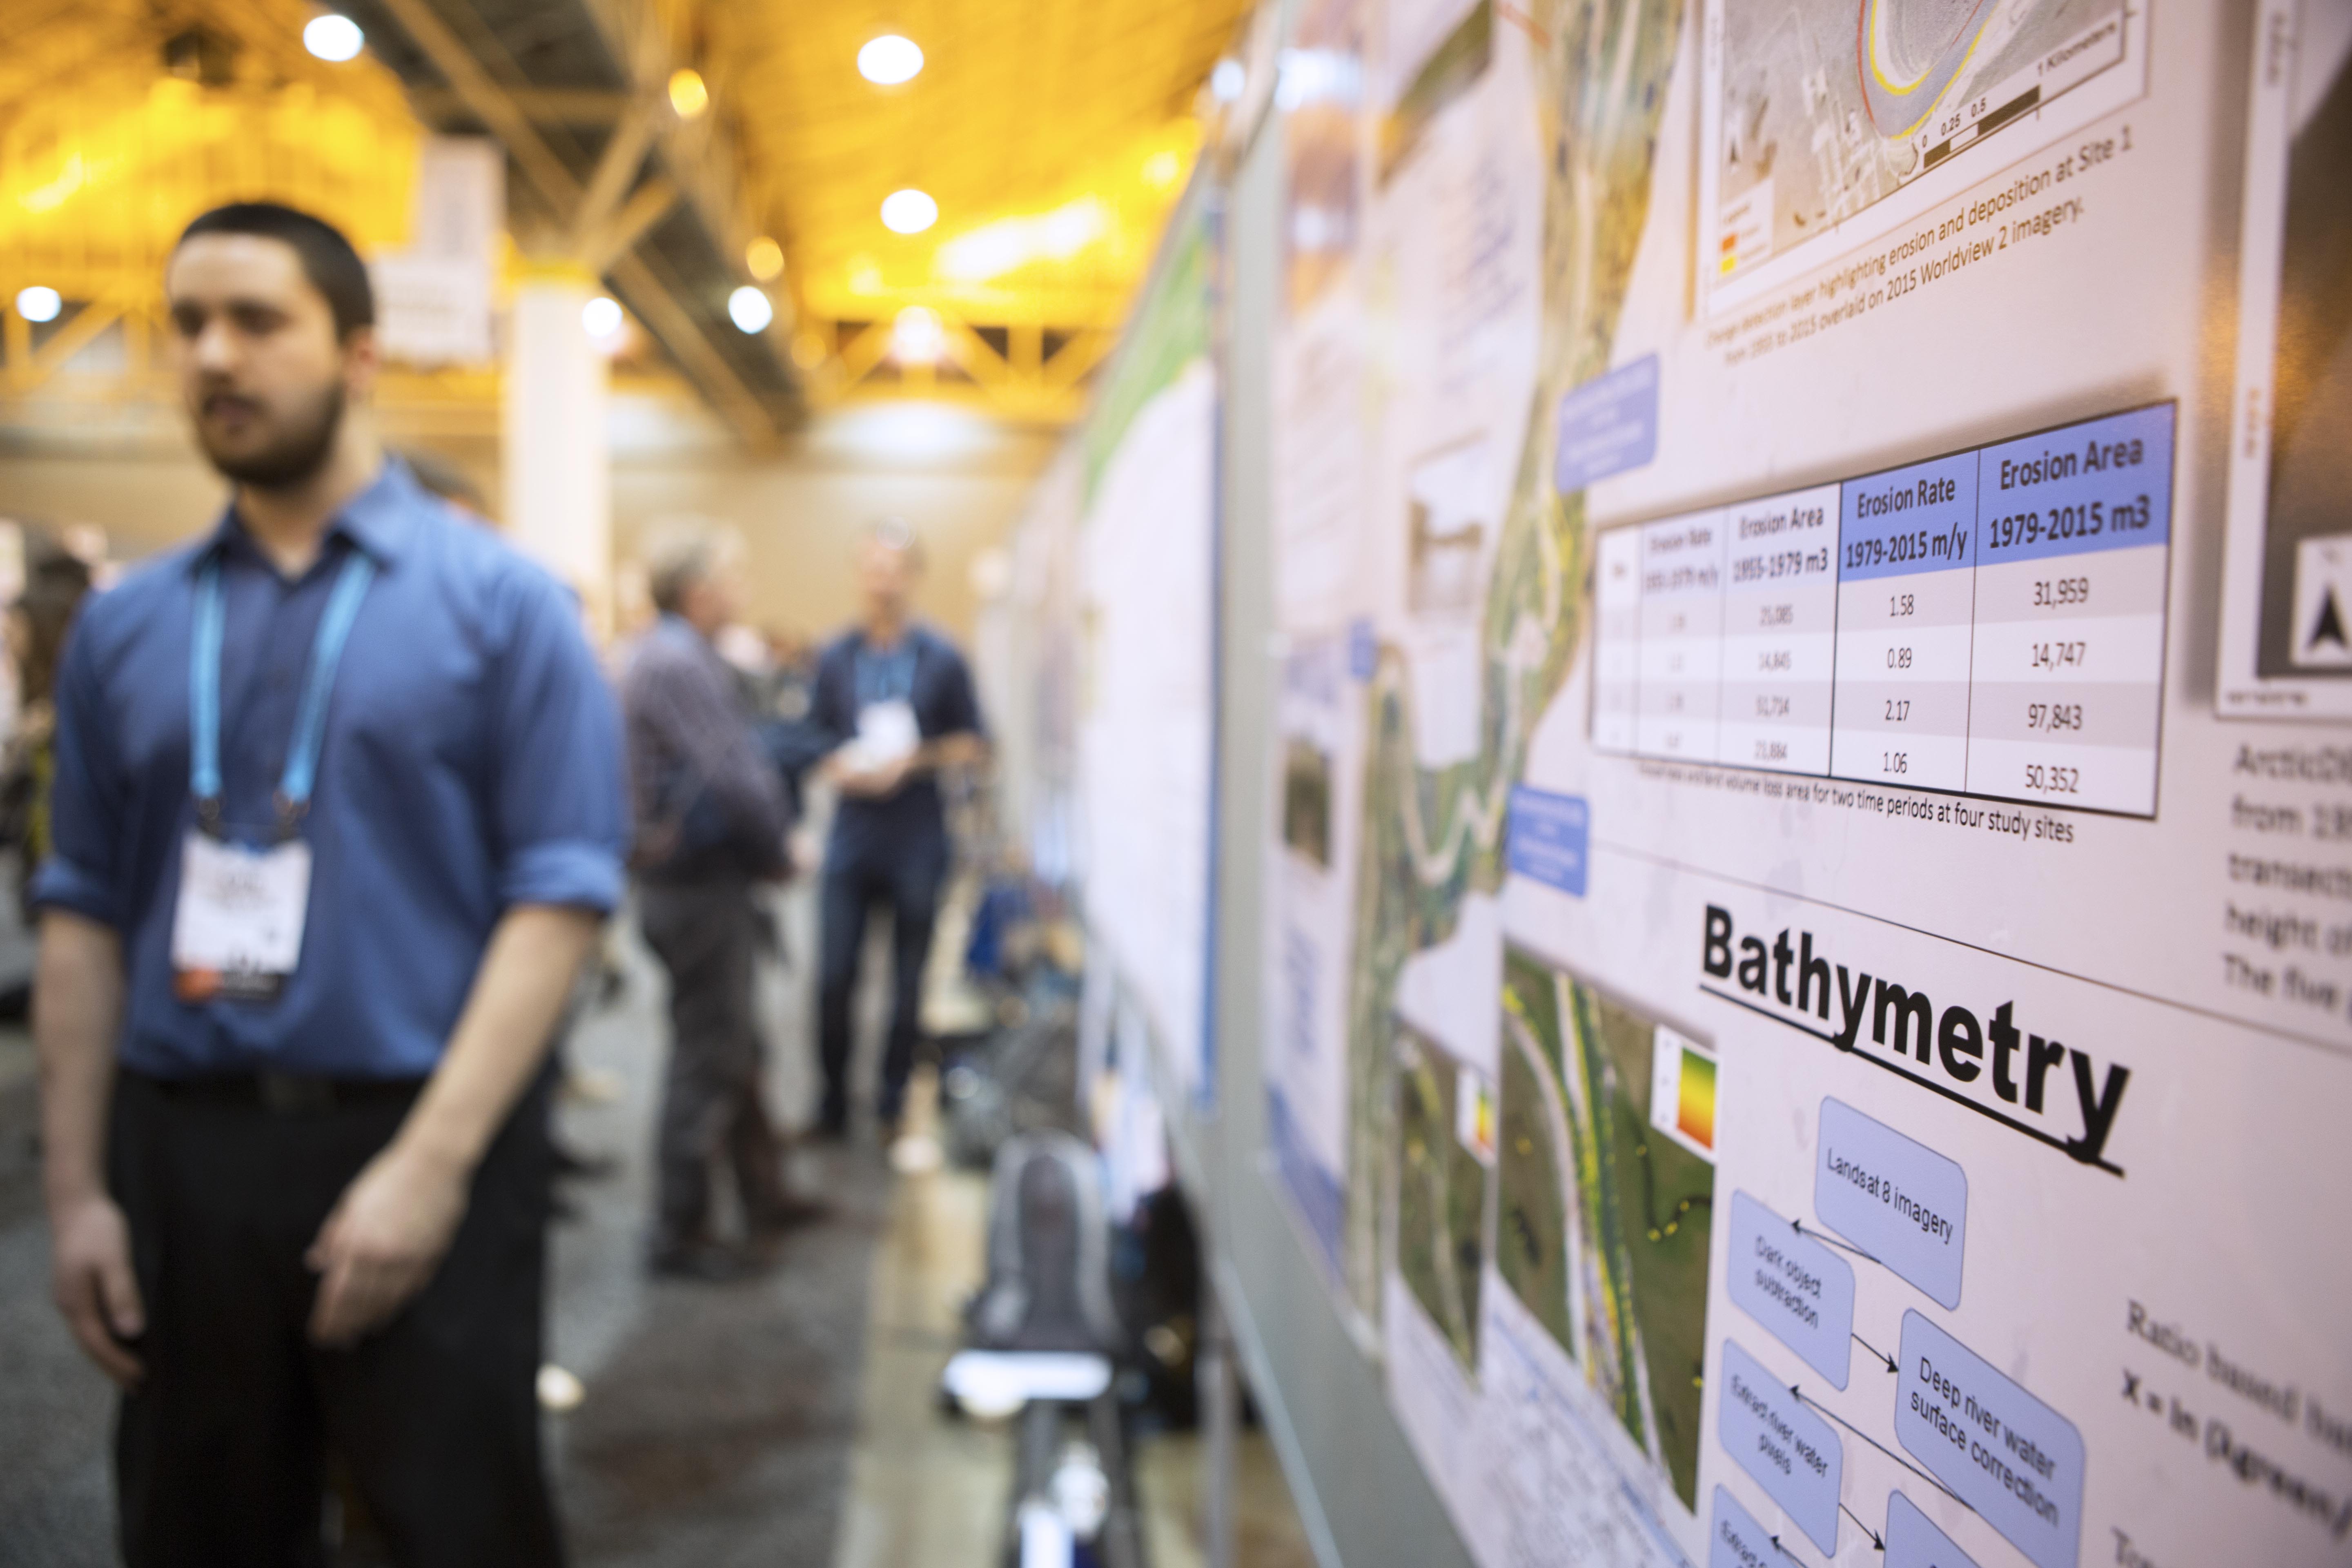 A researcher stands by his poster at a science conference.